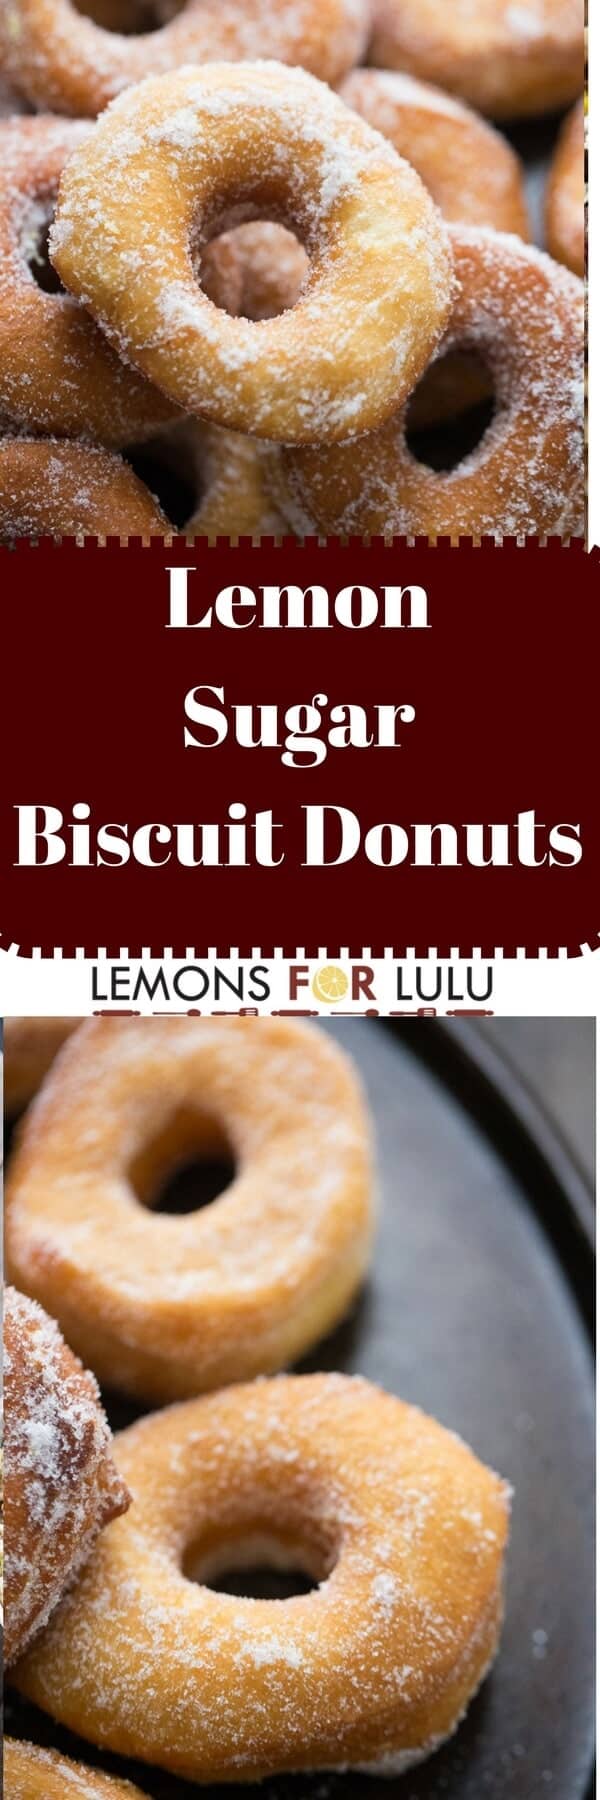 These easy biscuit donuts are lightly fried then tossed in a simple lemon sugar mixture!